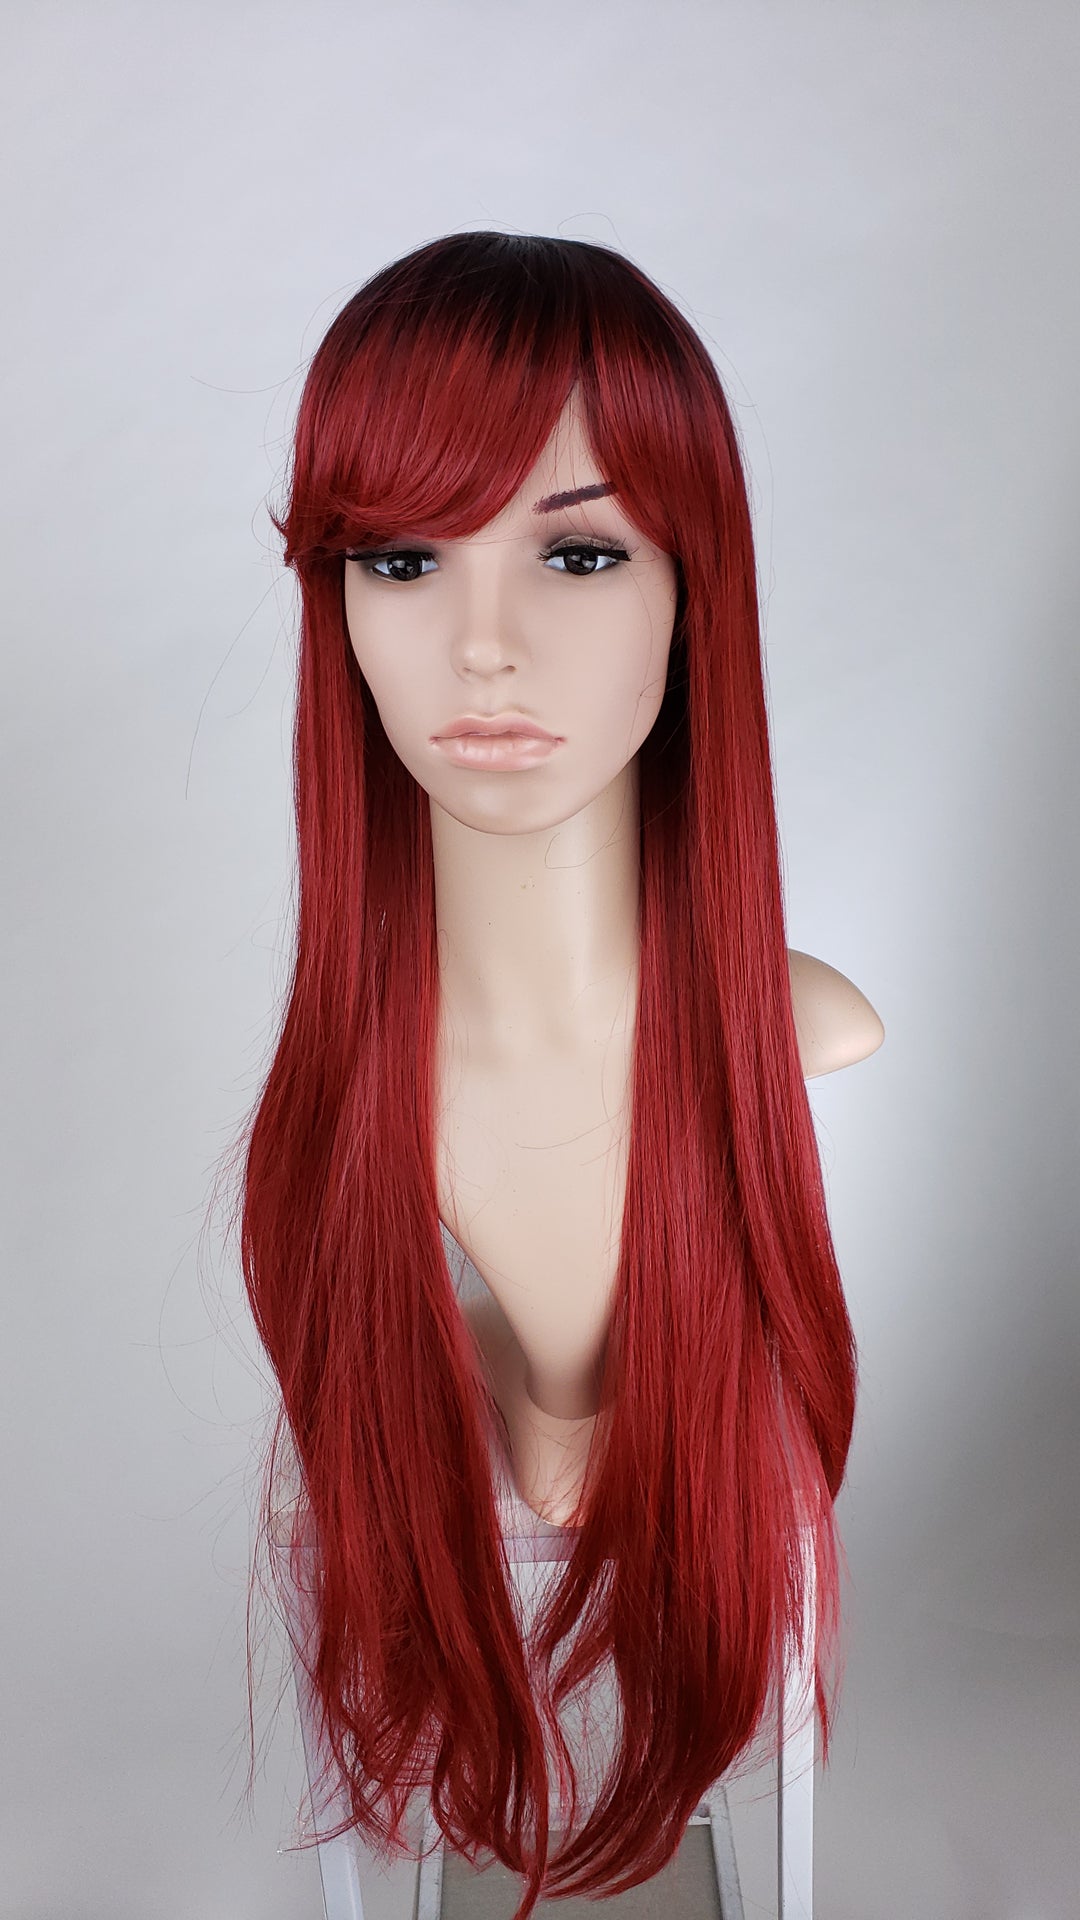 Pose Wigs Red Ombre Long Straight with Bangs Fashion Wig HSAPR81